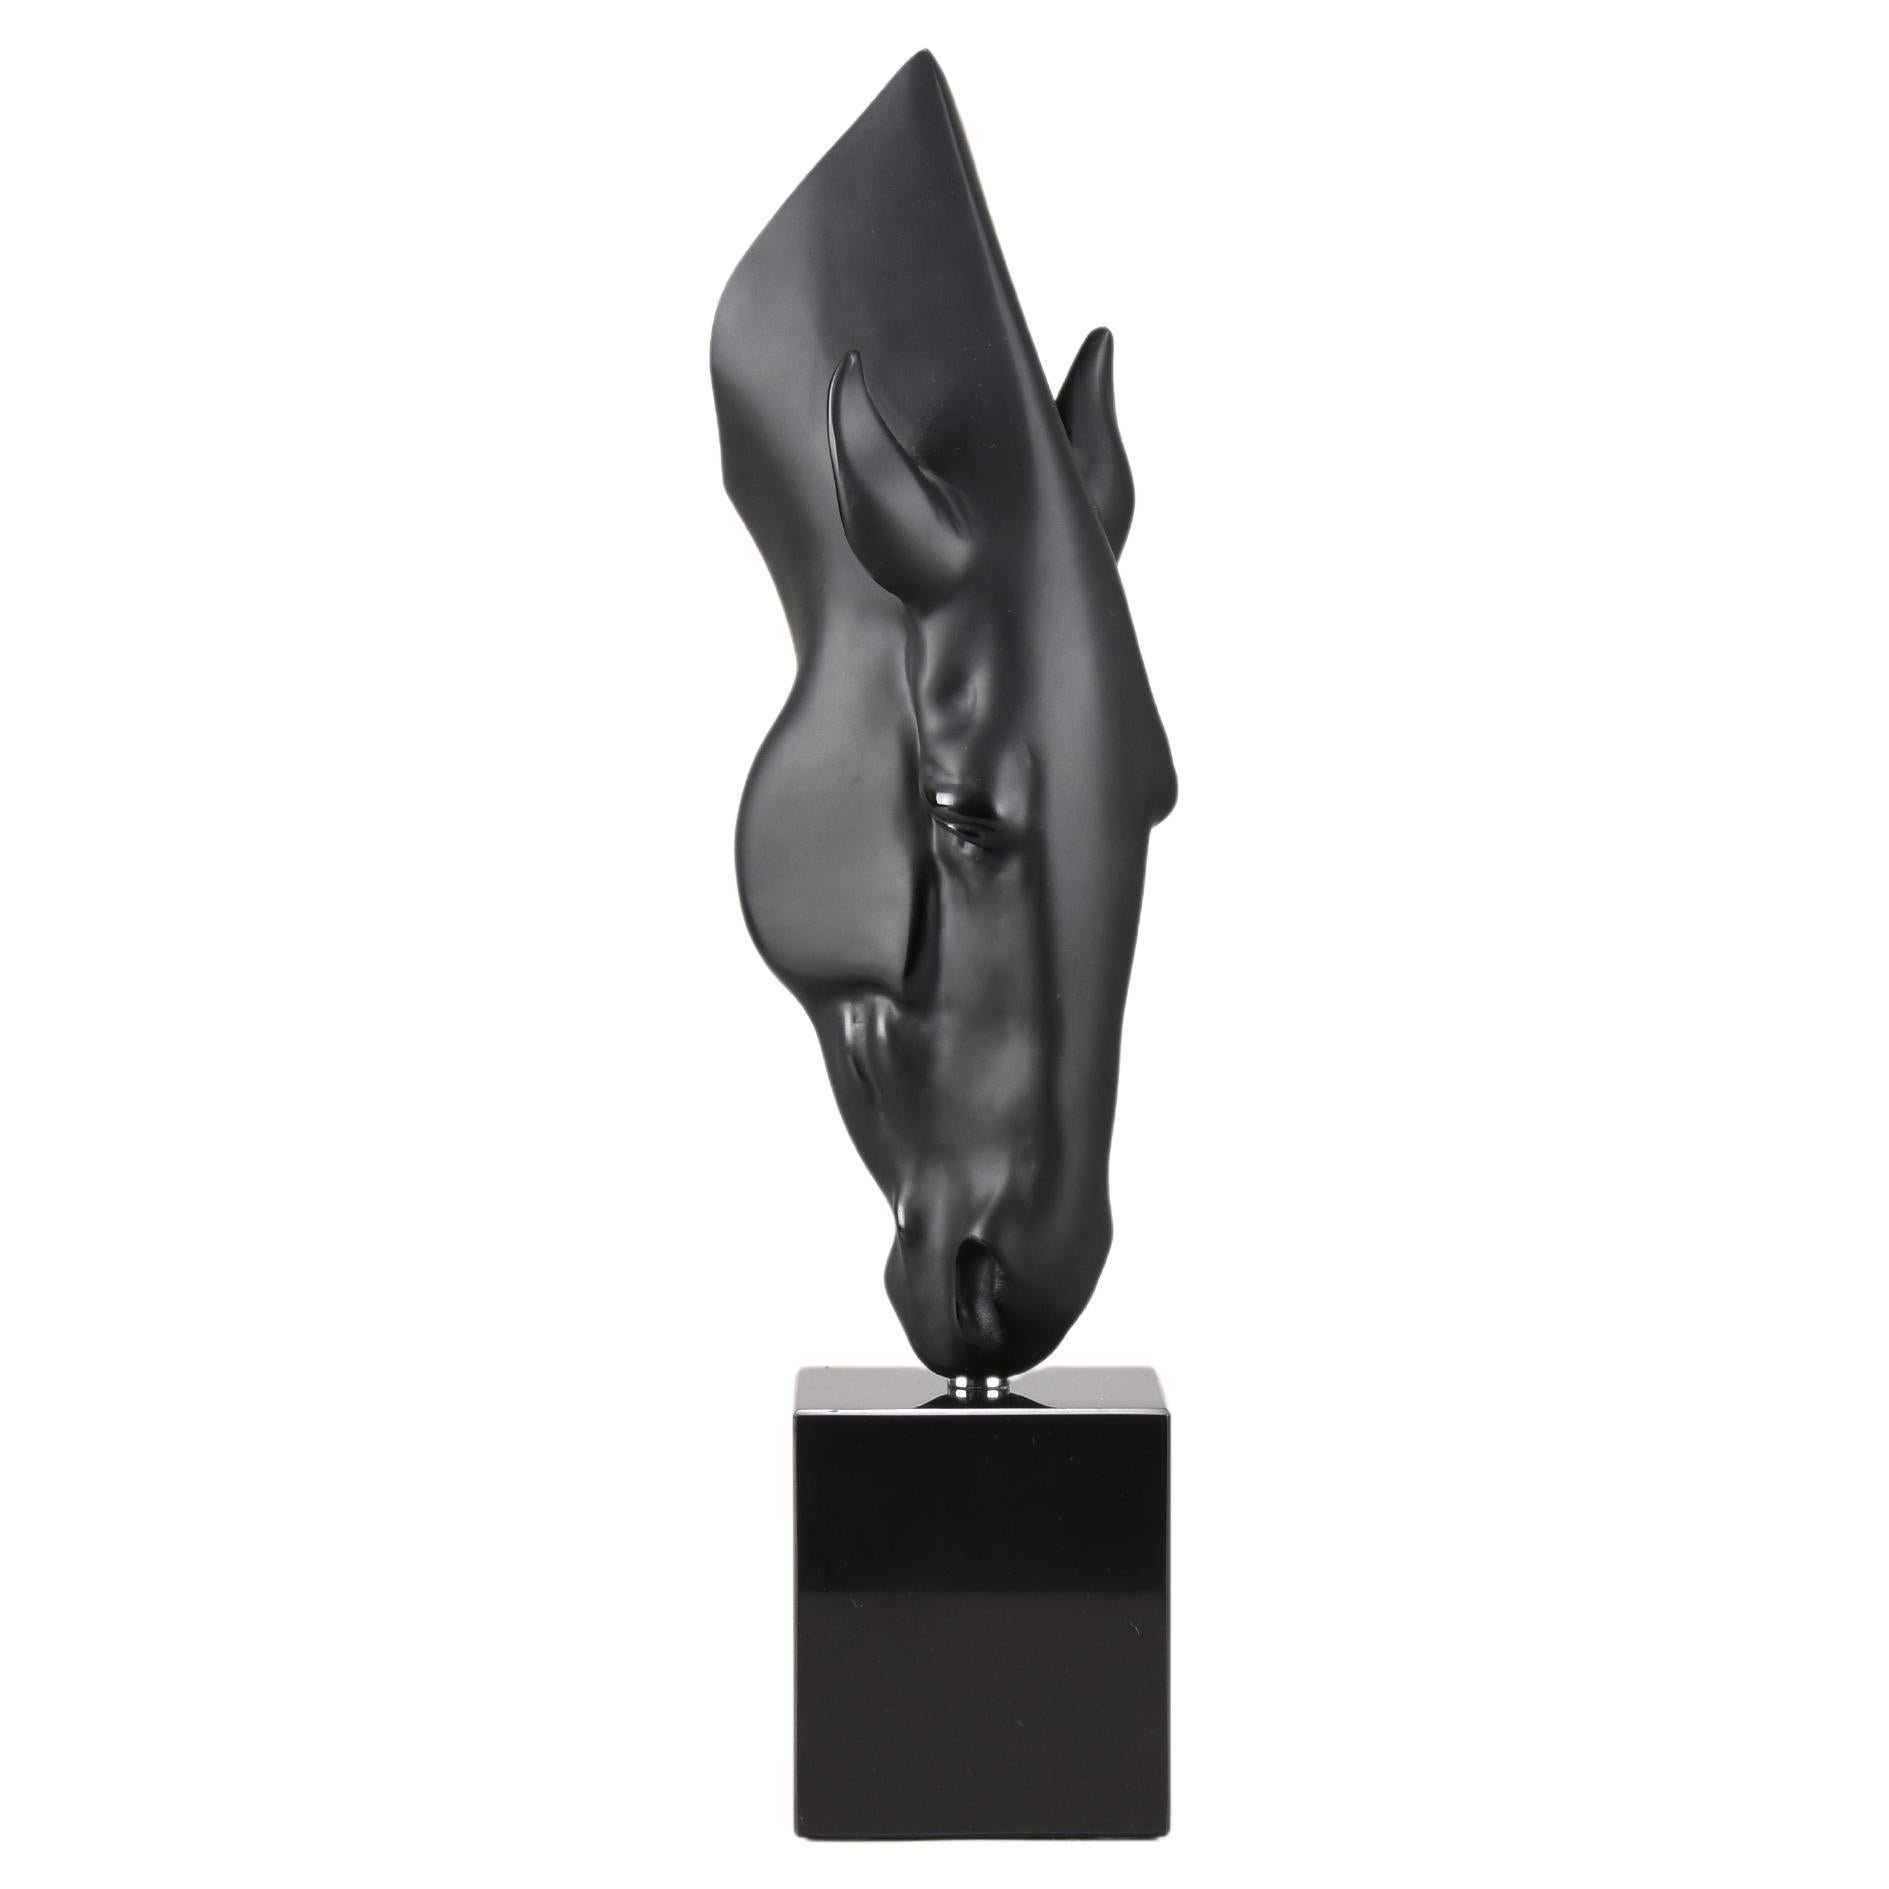 Lalique Crystal Glass Sculpture Entitled "Still Water" by Nic Fiddian Green